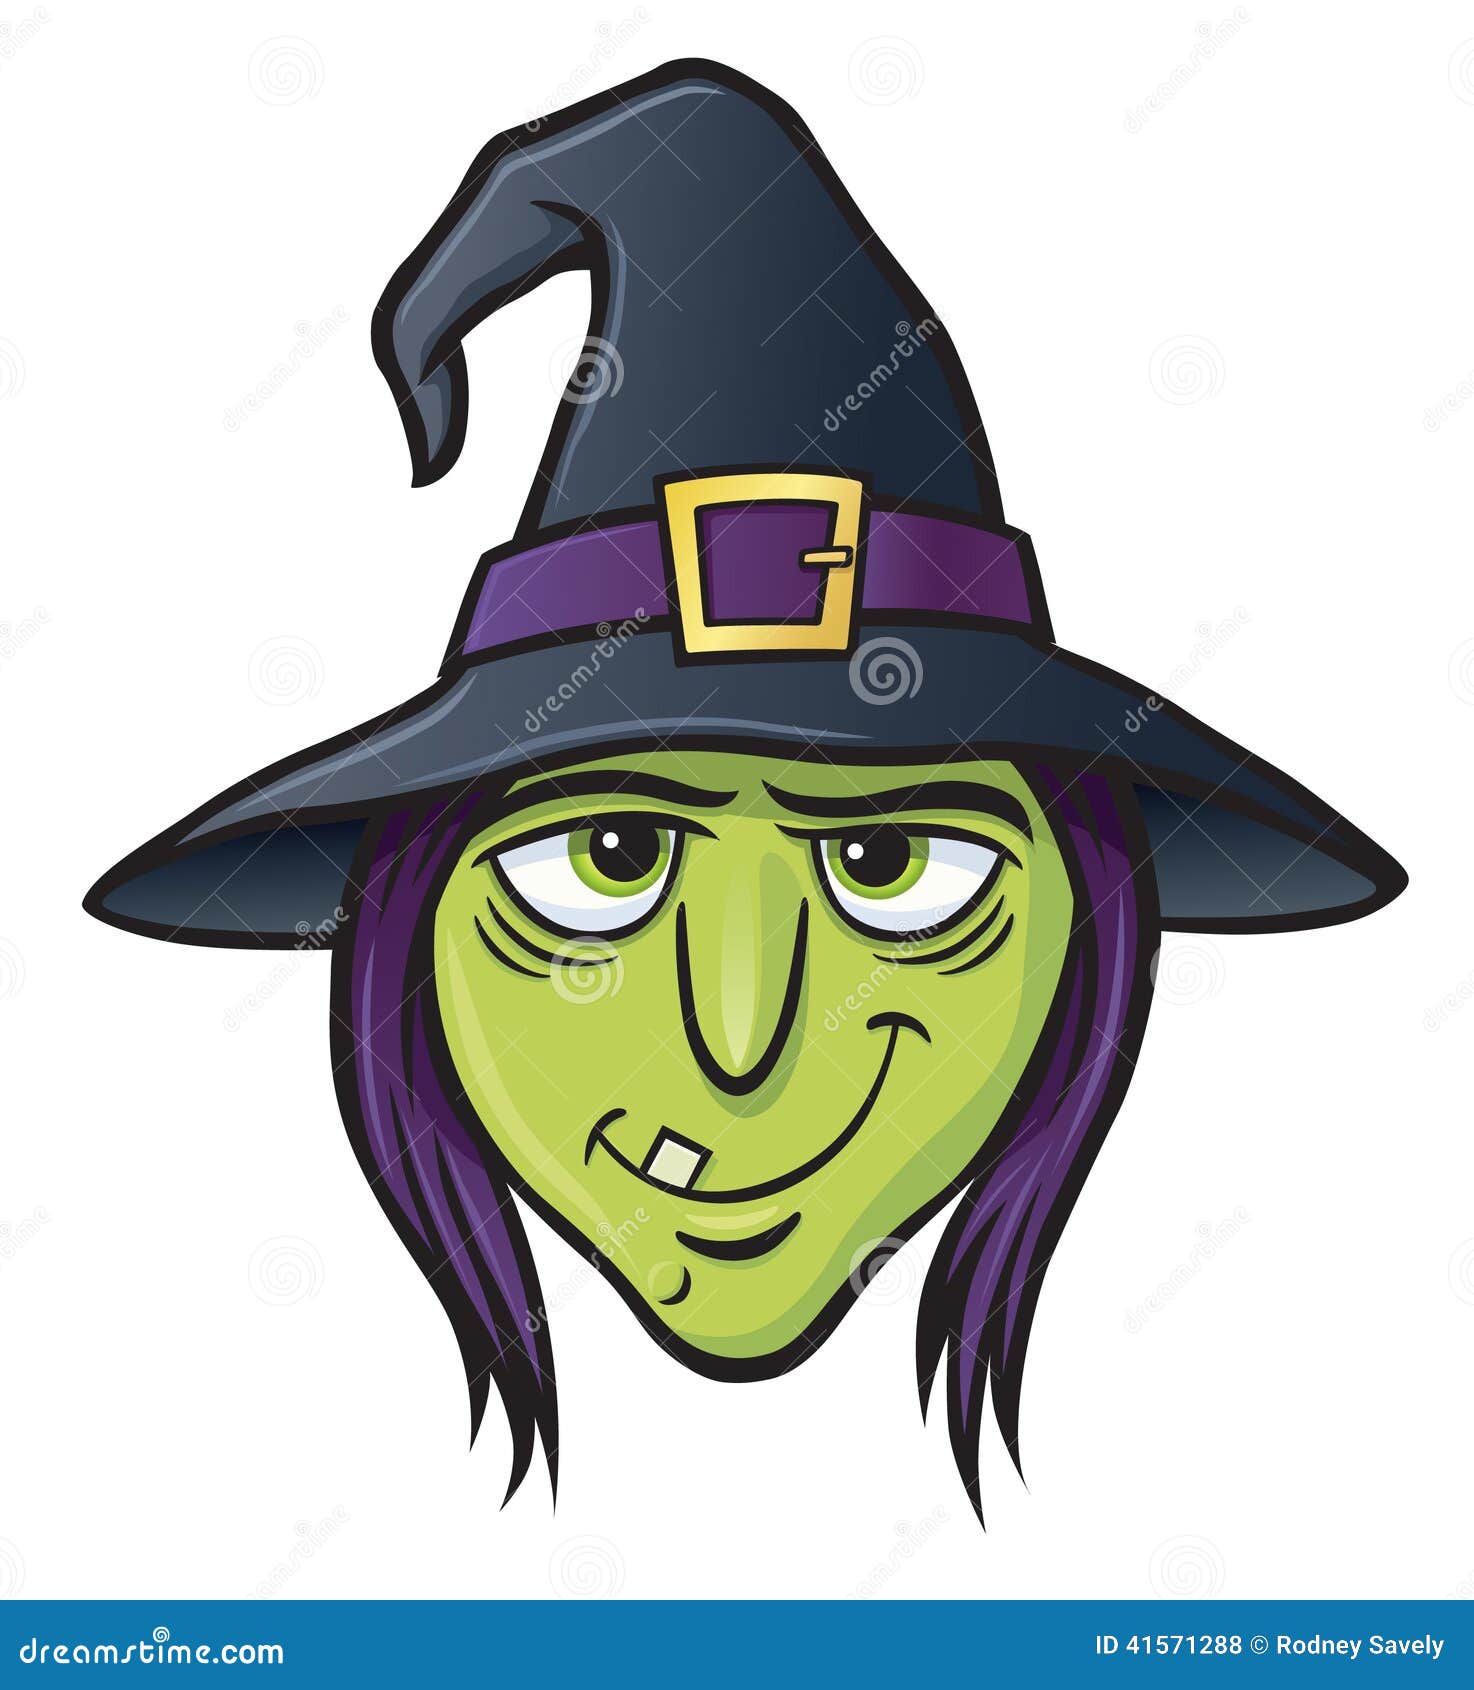 Cartoon illustration of a witch's face.